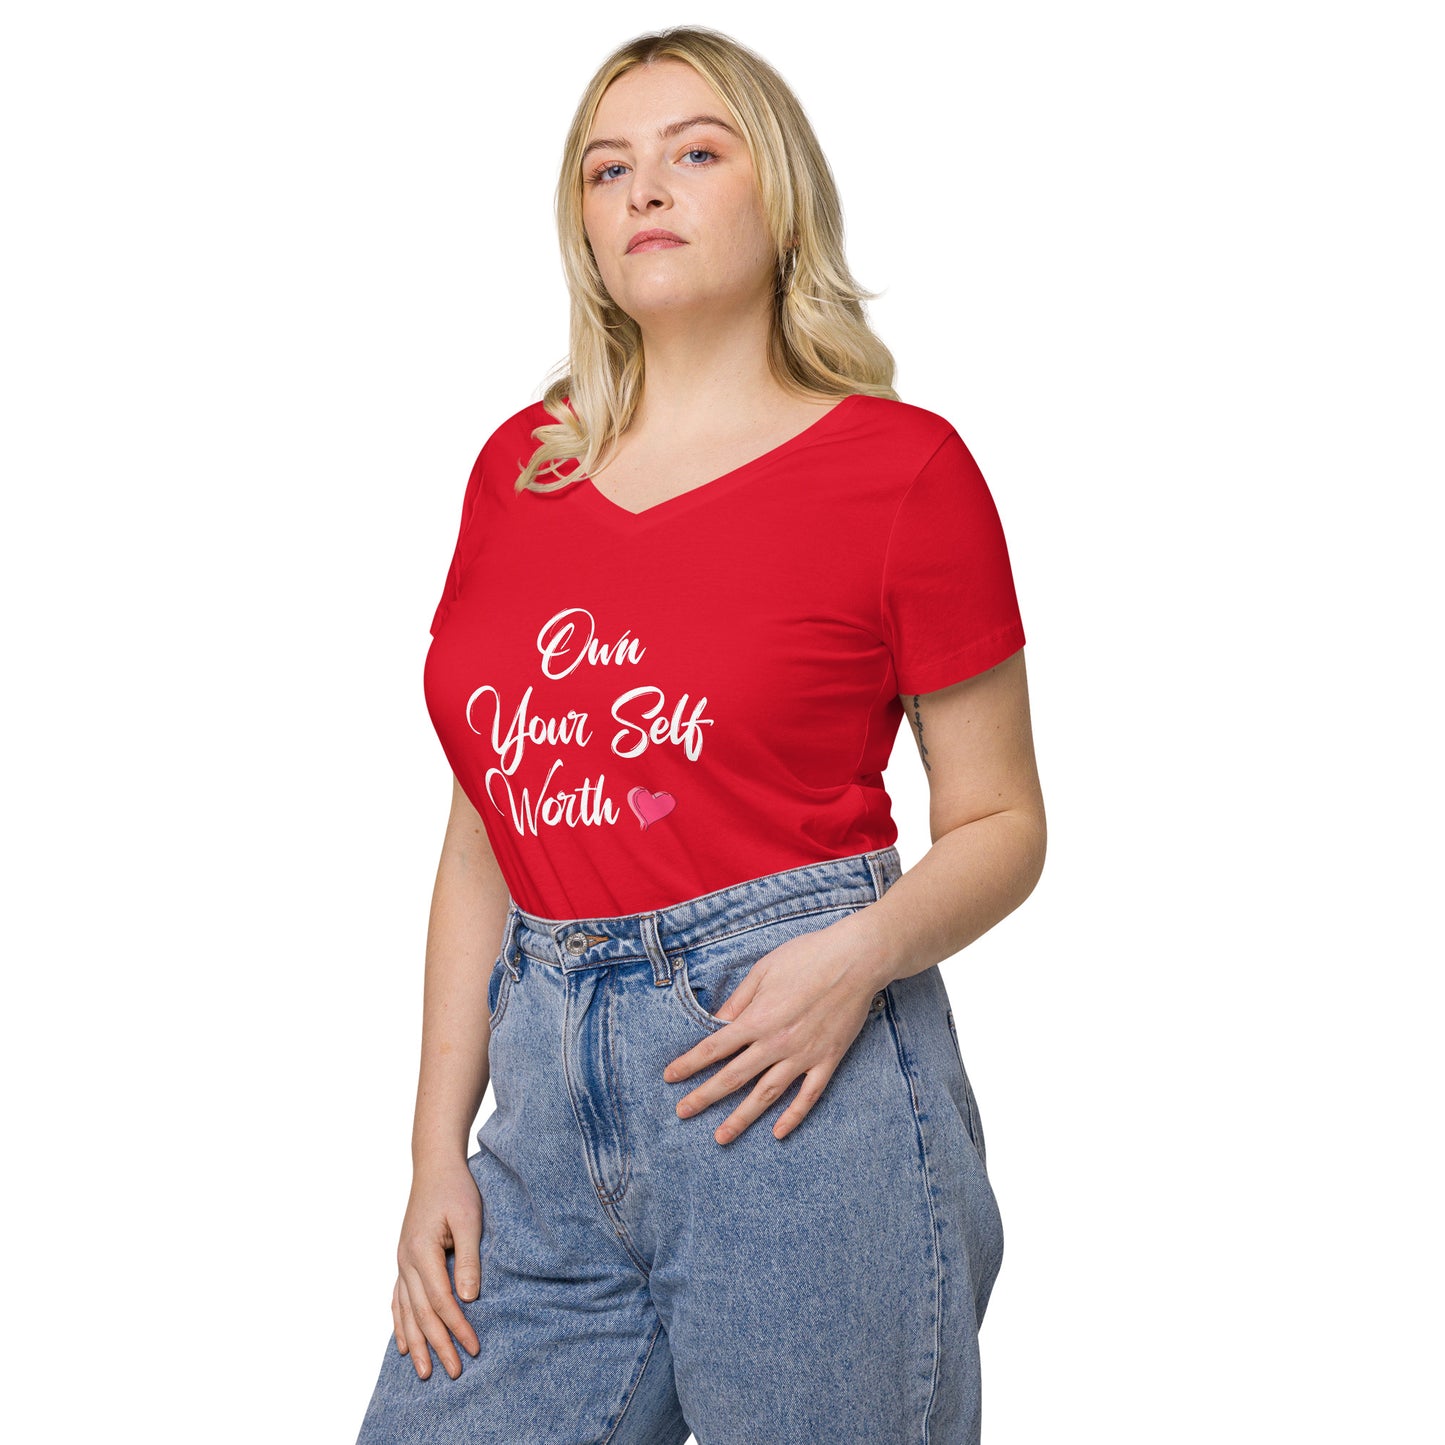 Own your self worth v-neck t-shirt